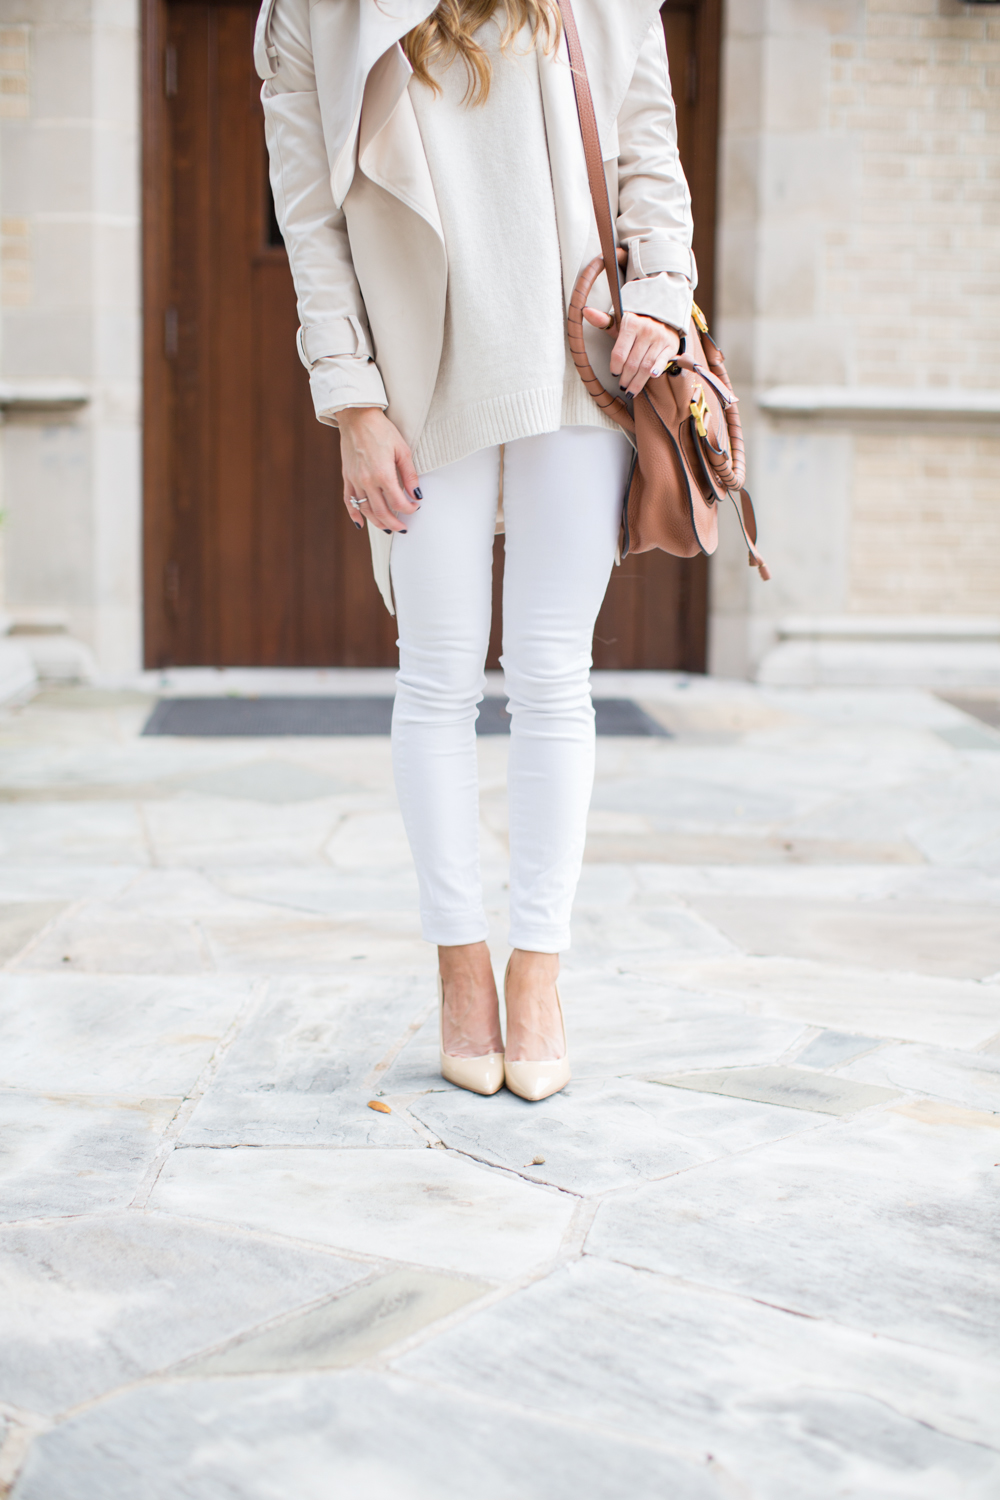 Winter White Look with white jeans cream sweater chloe bag nude patent pumps, winter white outfit, chloe marcie bag in tan, white jeans outfit in winter, tone on tone outfit, all white winter outfit